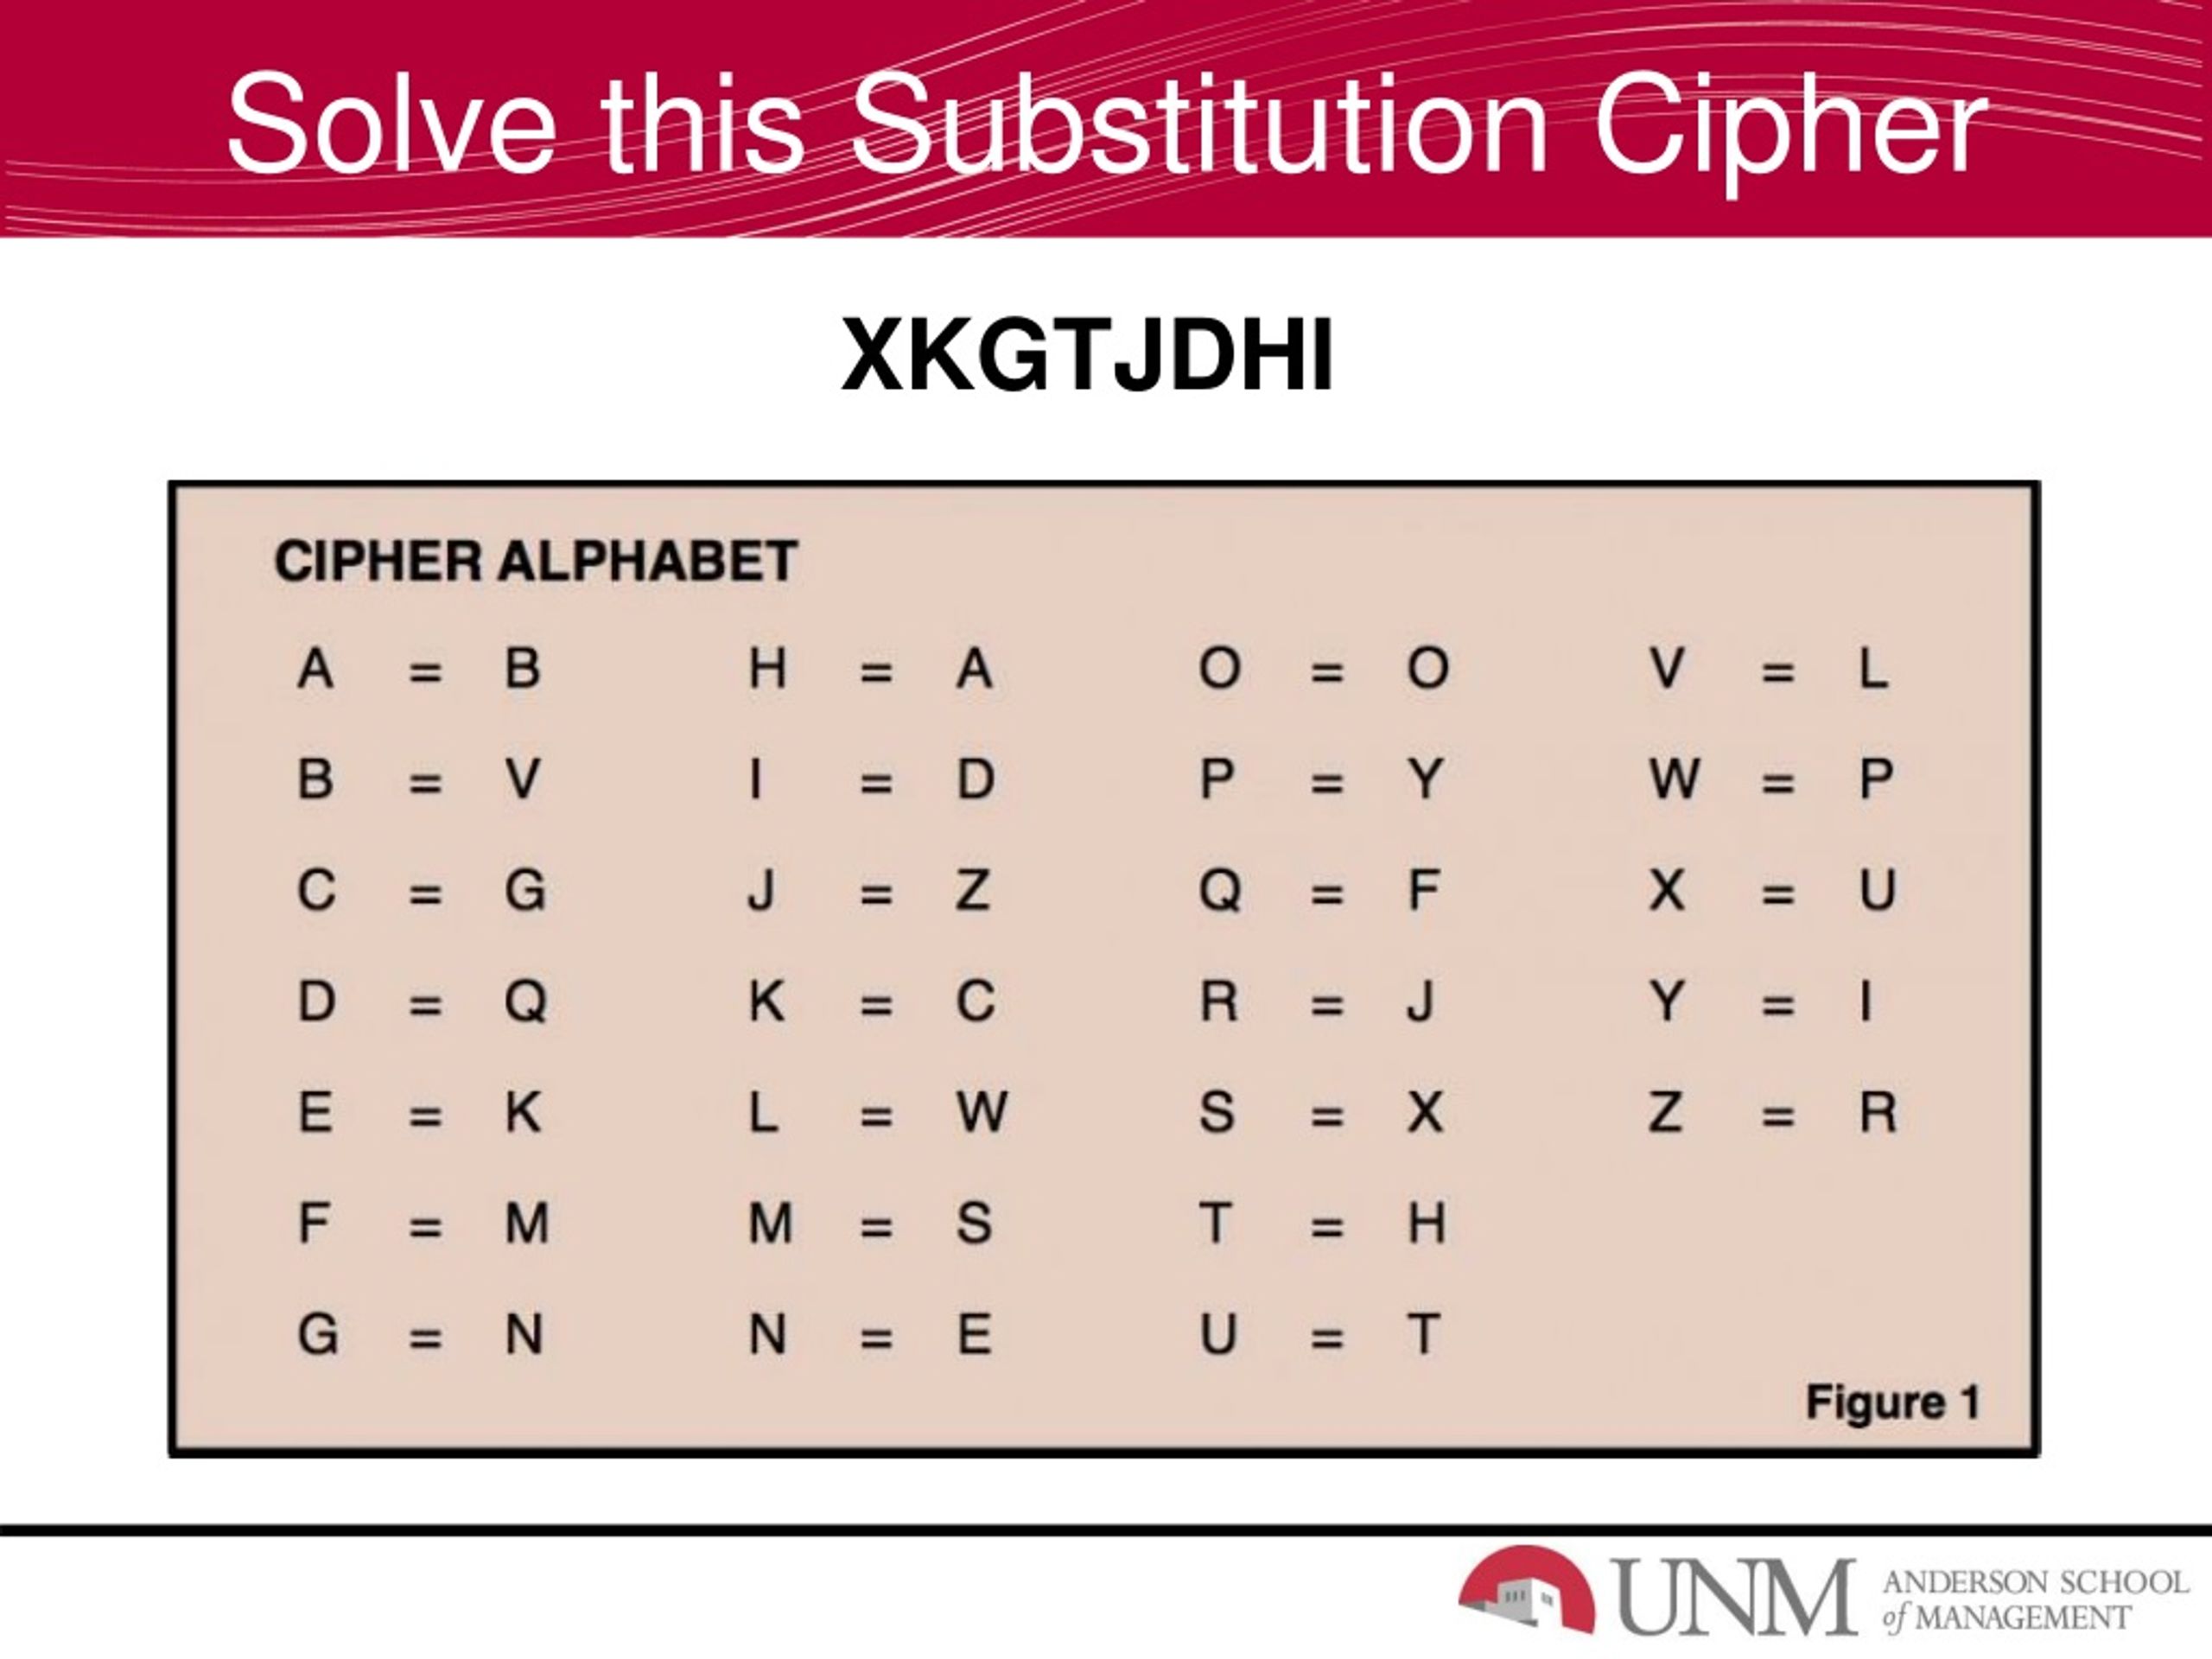 substitution cipher decryption tool